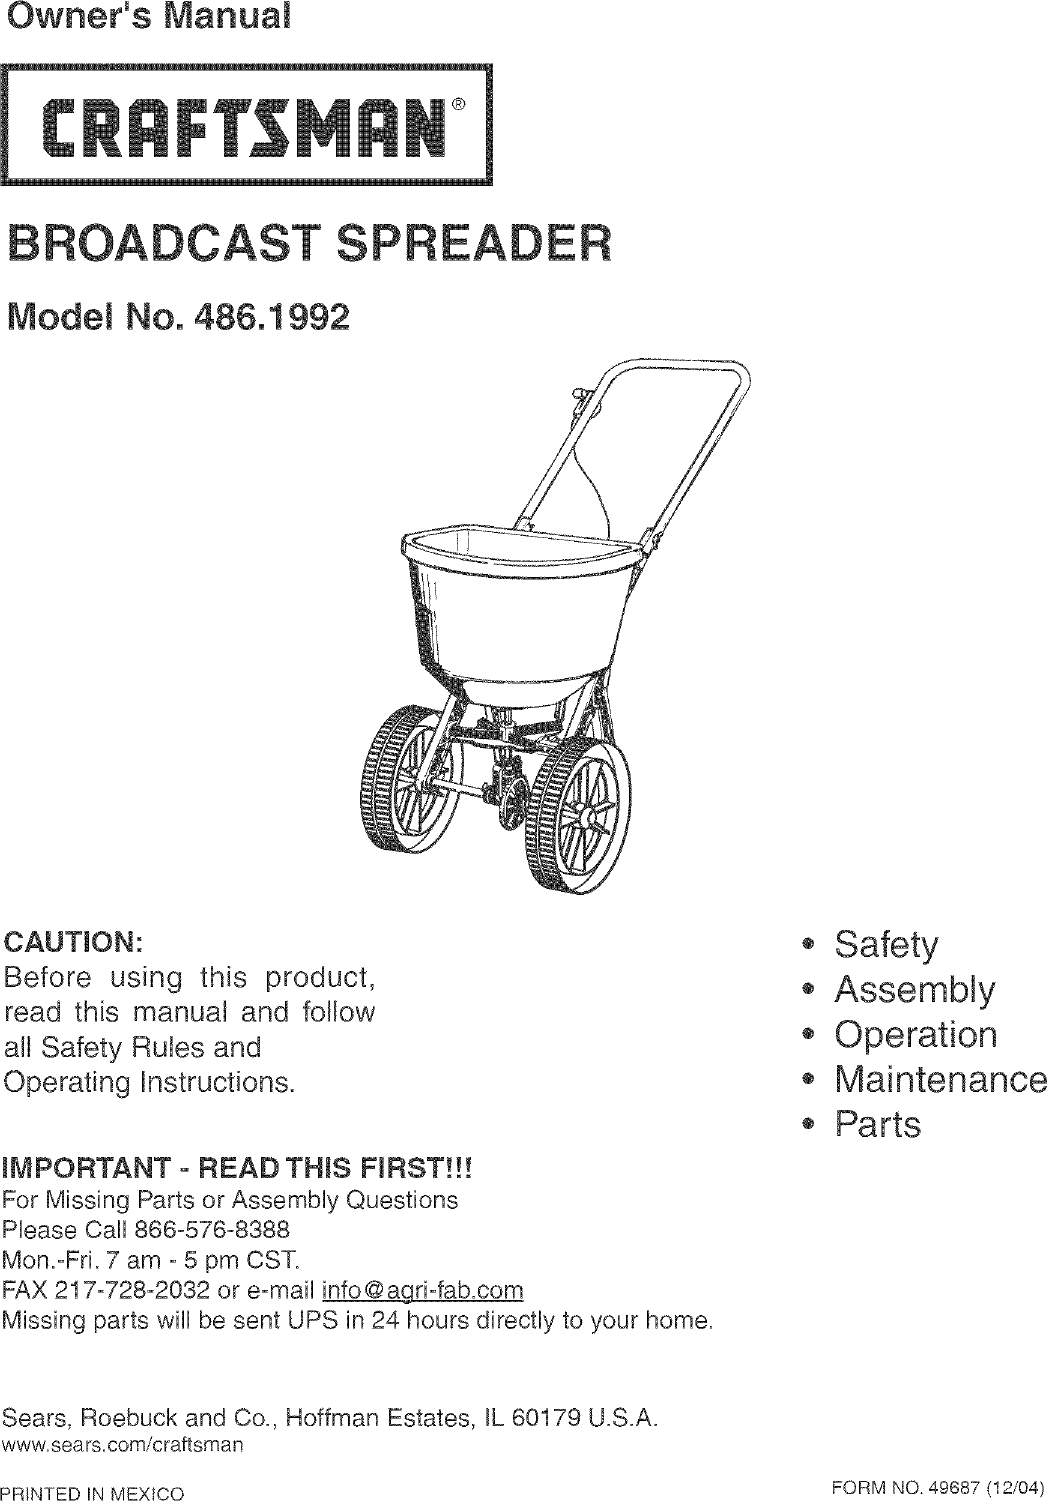 Page 1 of 4 - Craftsman 4861992 User Manual  BROADCAST SPREADER - Manuals And Guides L0503109